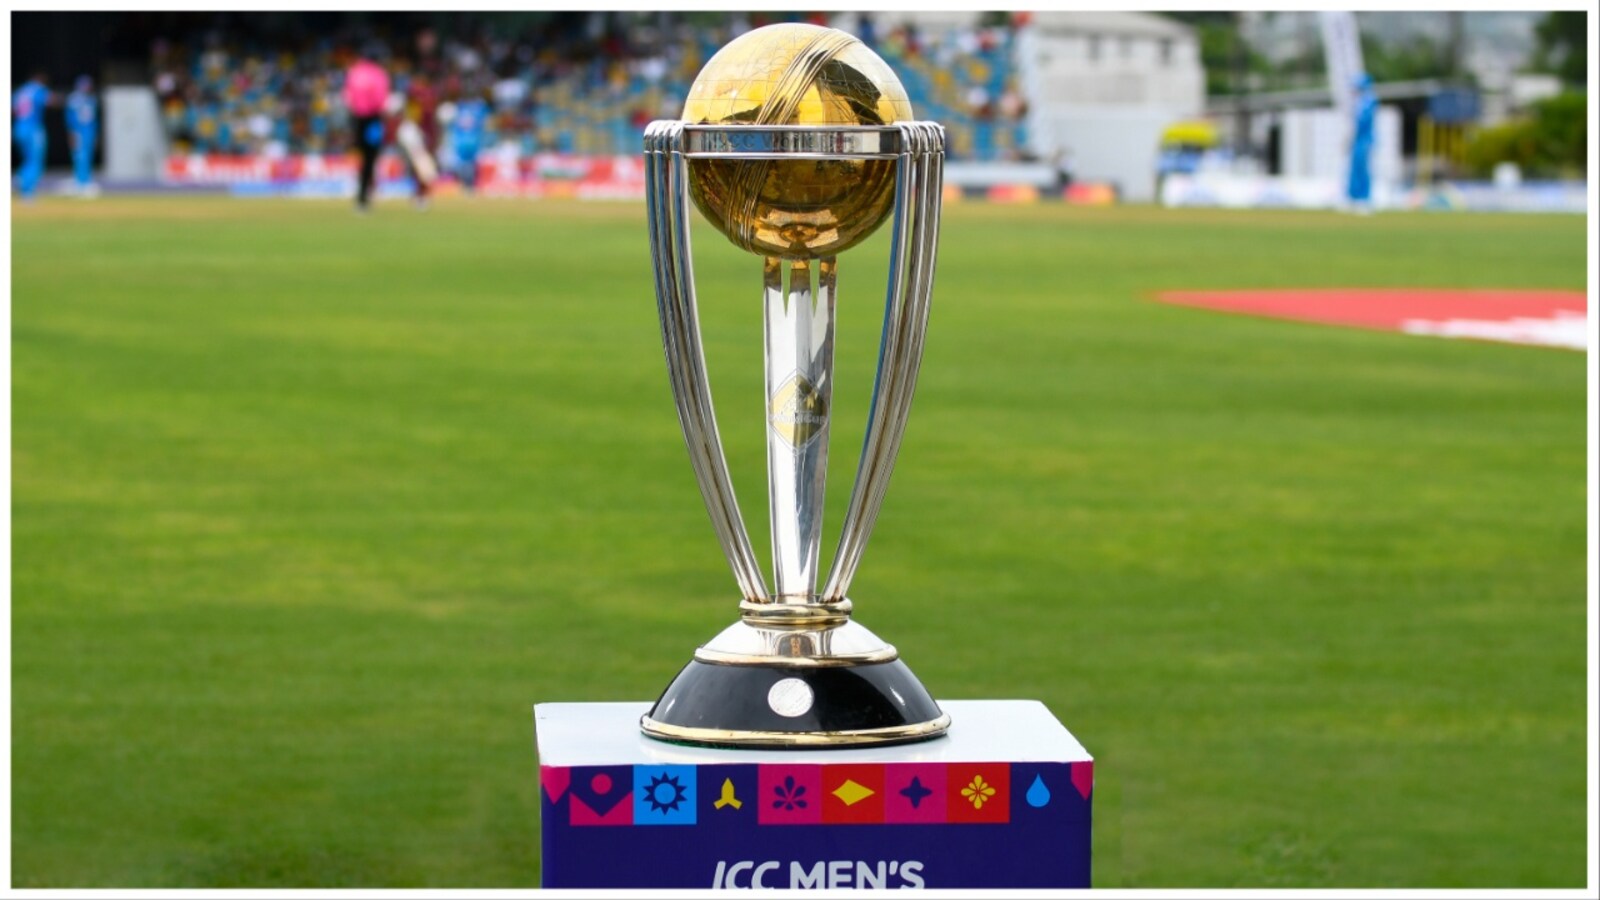 India vs Pakistan Head-to-Head Record, ICC World Cup 2023: Team India look  to make it 8 out of 8 wins in ODI World Cups